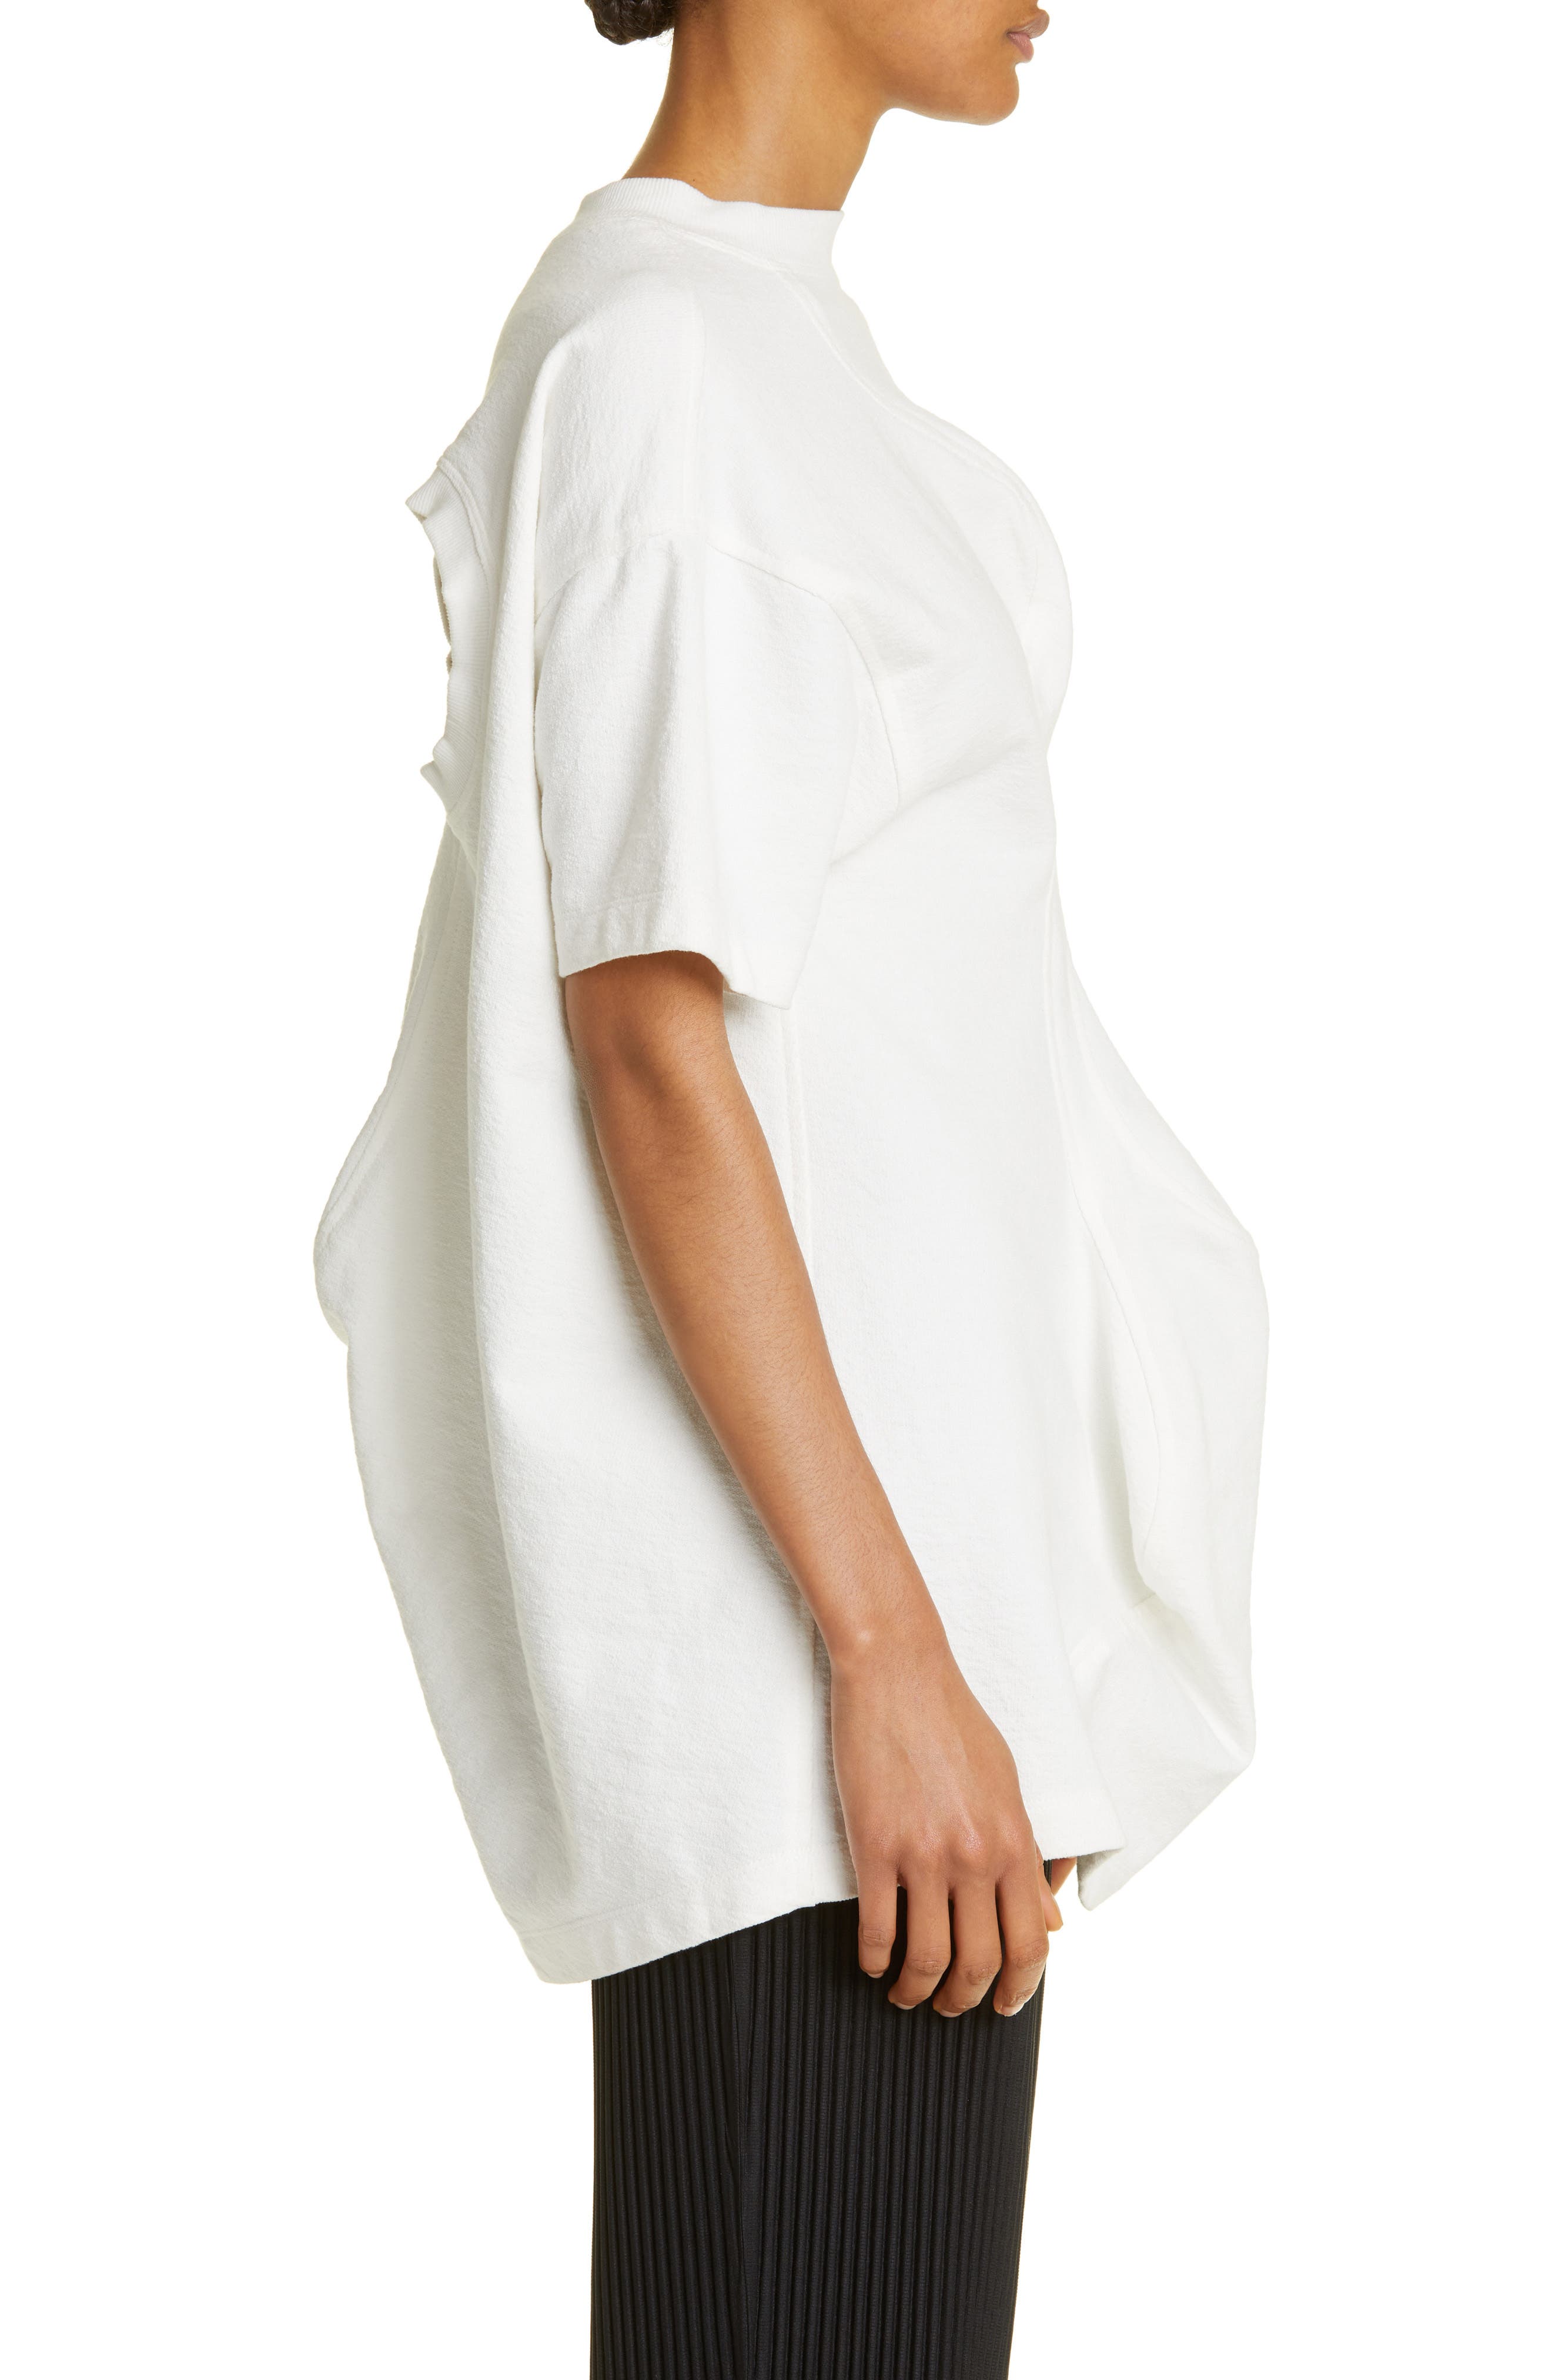 MELITTA BAUMEISTER Twisted Cotton T-Shirt in Off White | Smart Closet